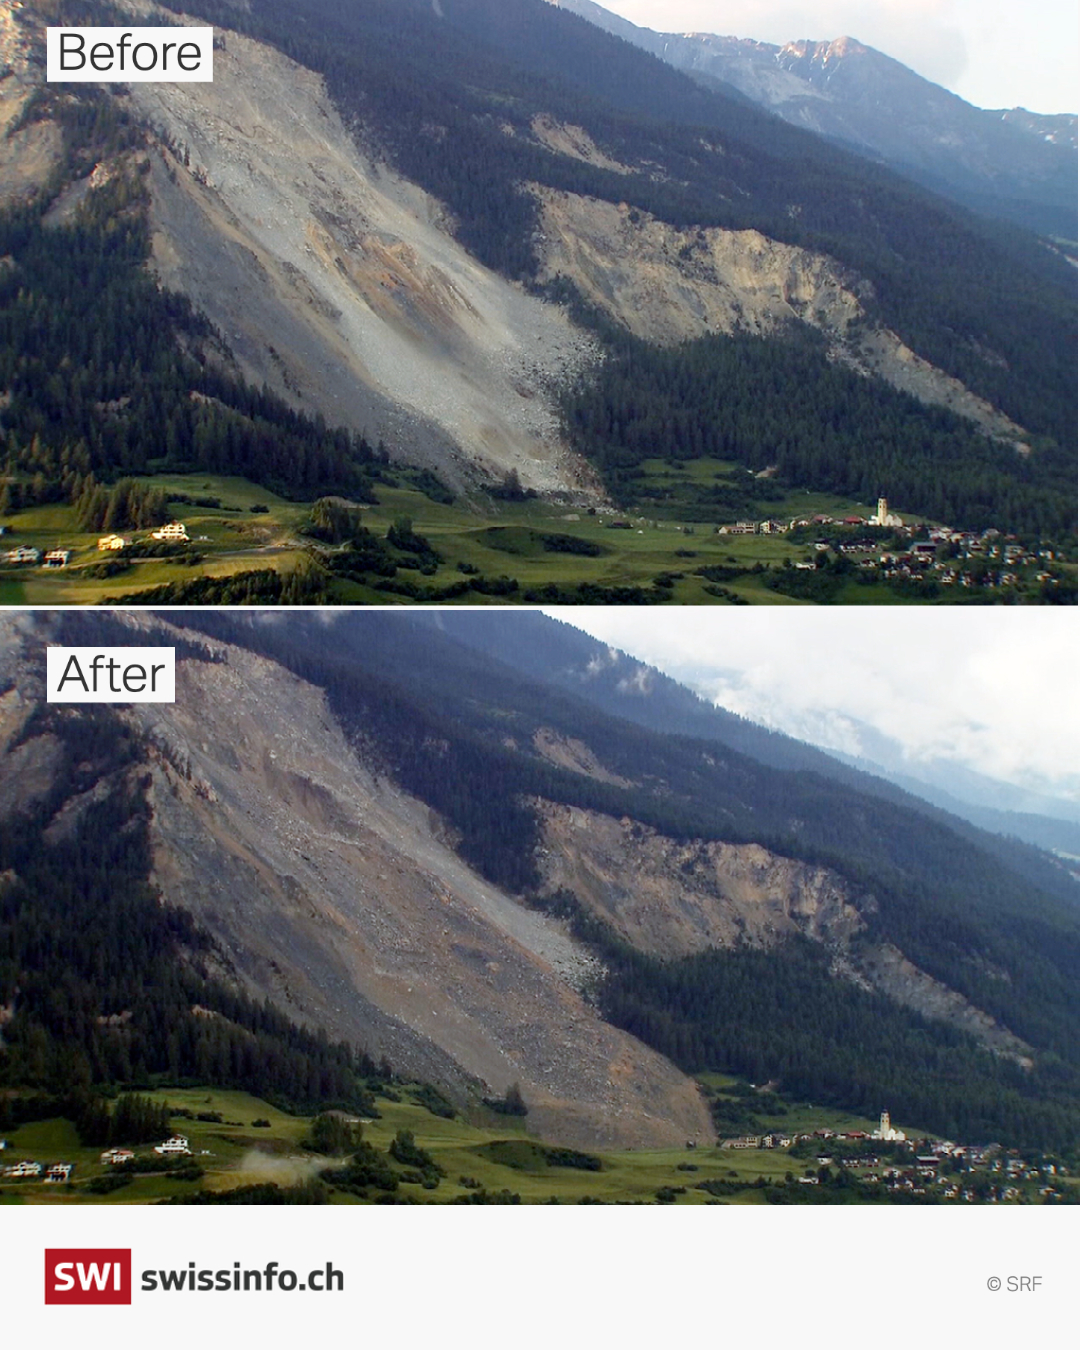 Side by side images of Brienz (before and after landslide)